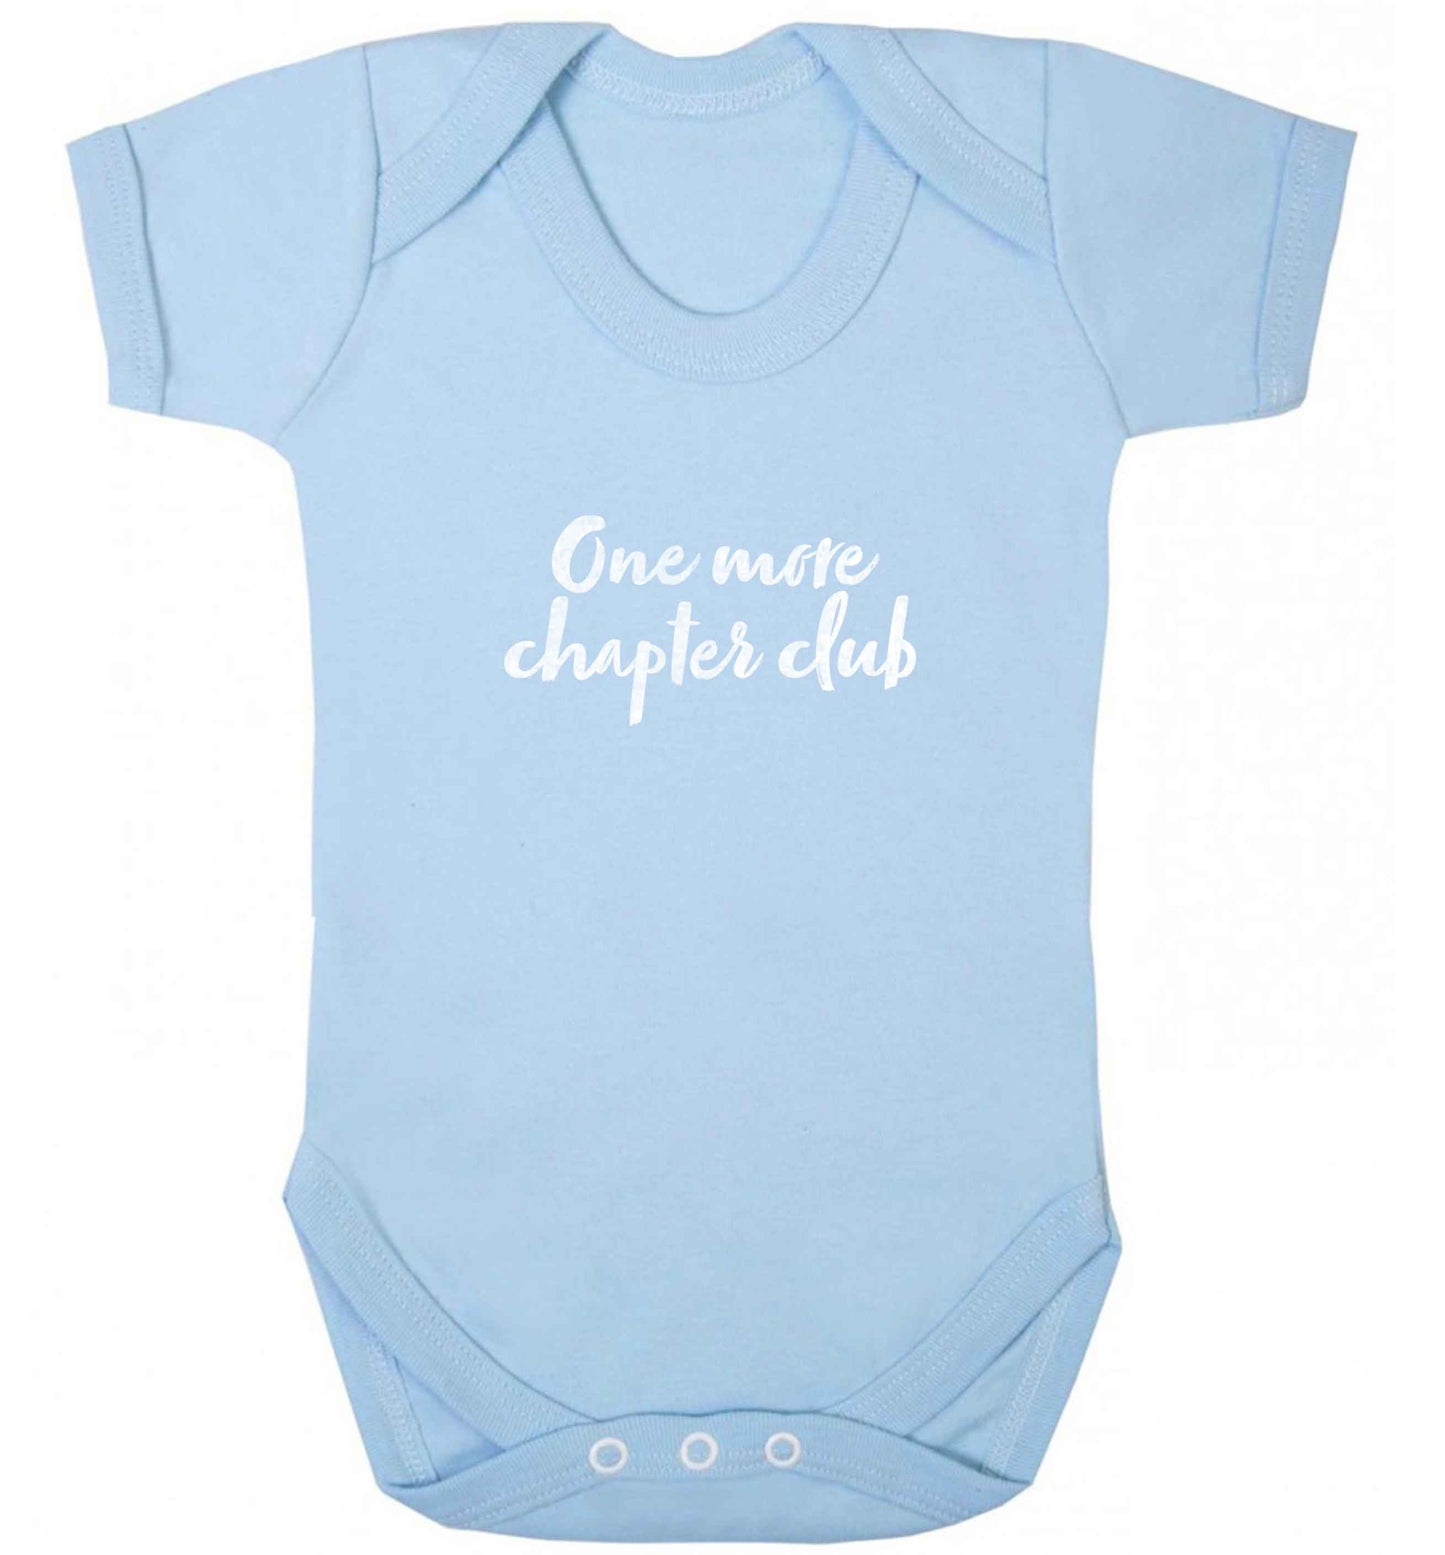 One more chapter club Kit baby vest pale blue 18-24 months